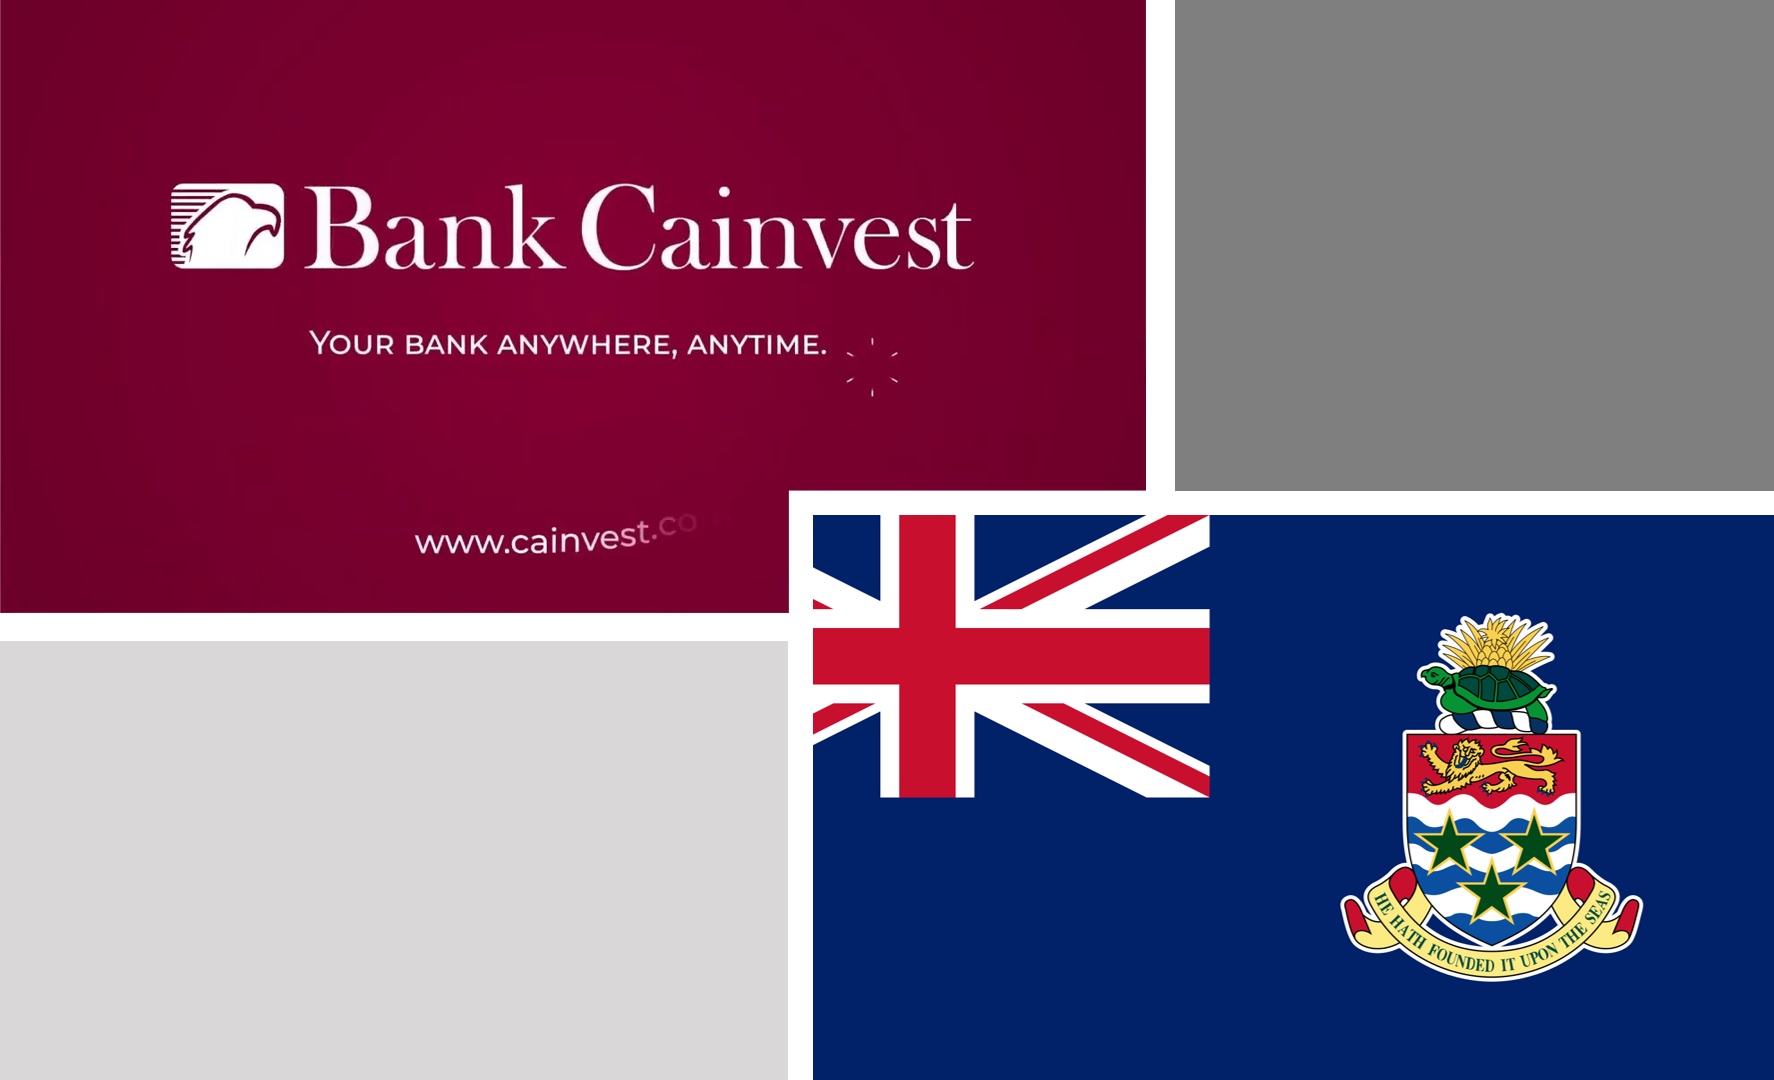 Cainevest Bank Cayman Islands